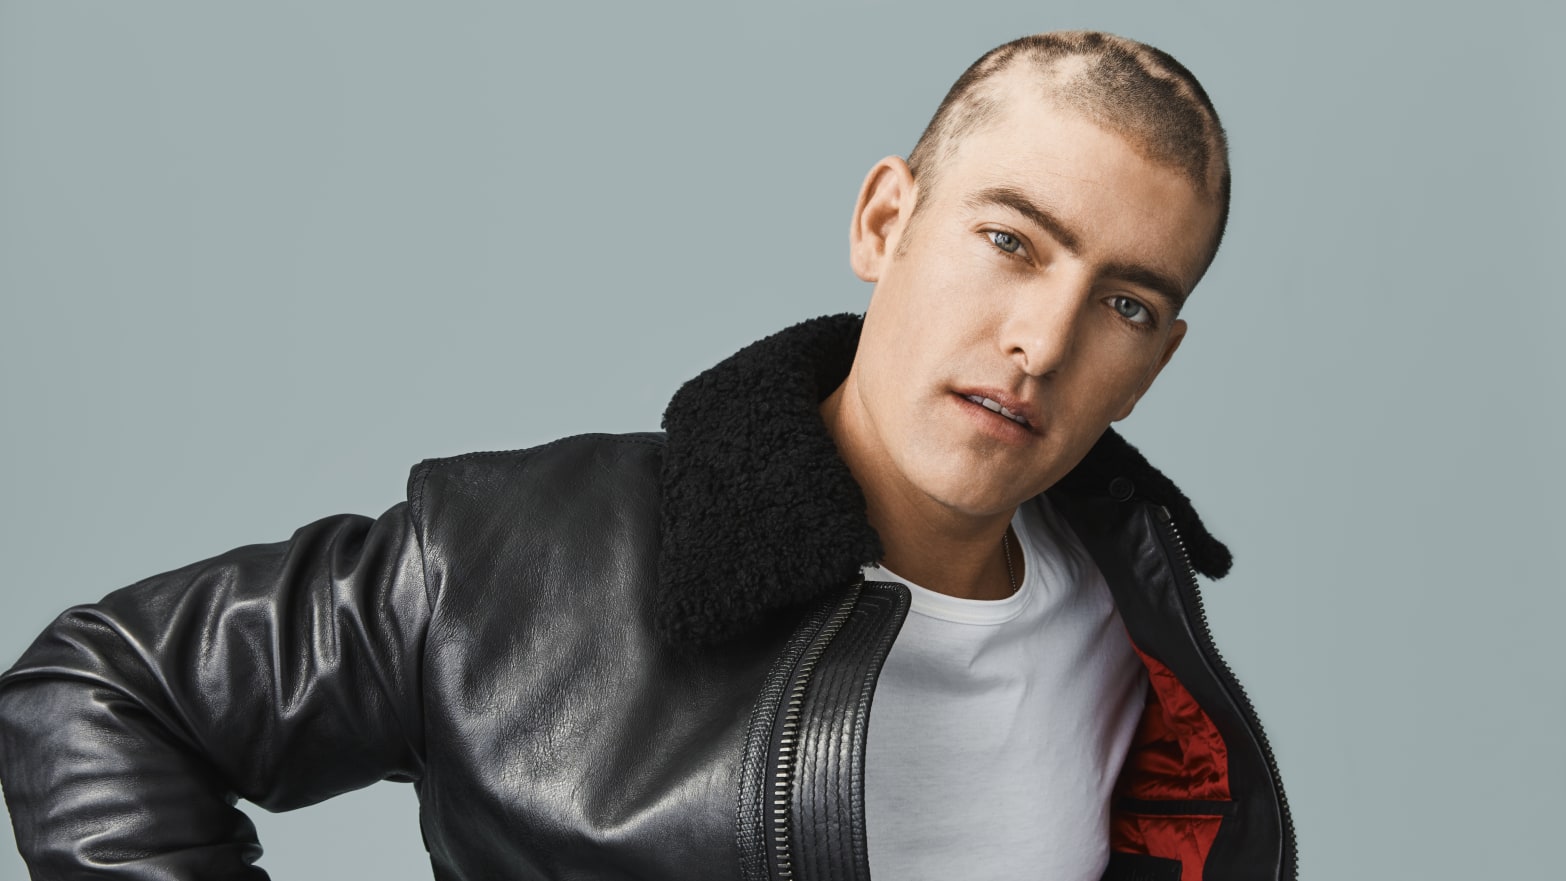 Male model shaved head